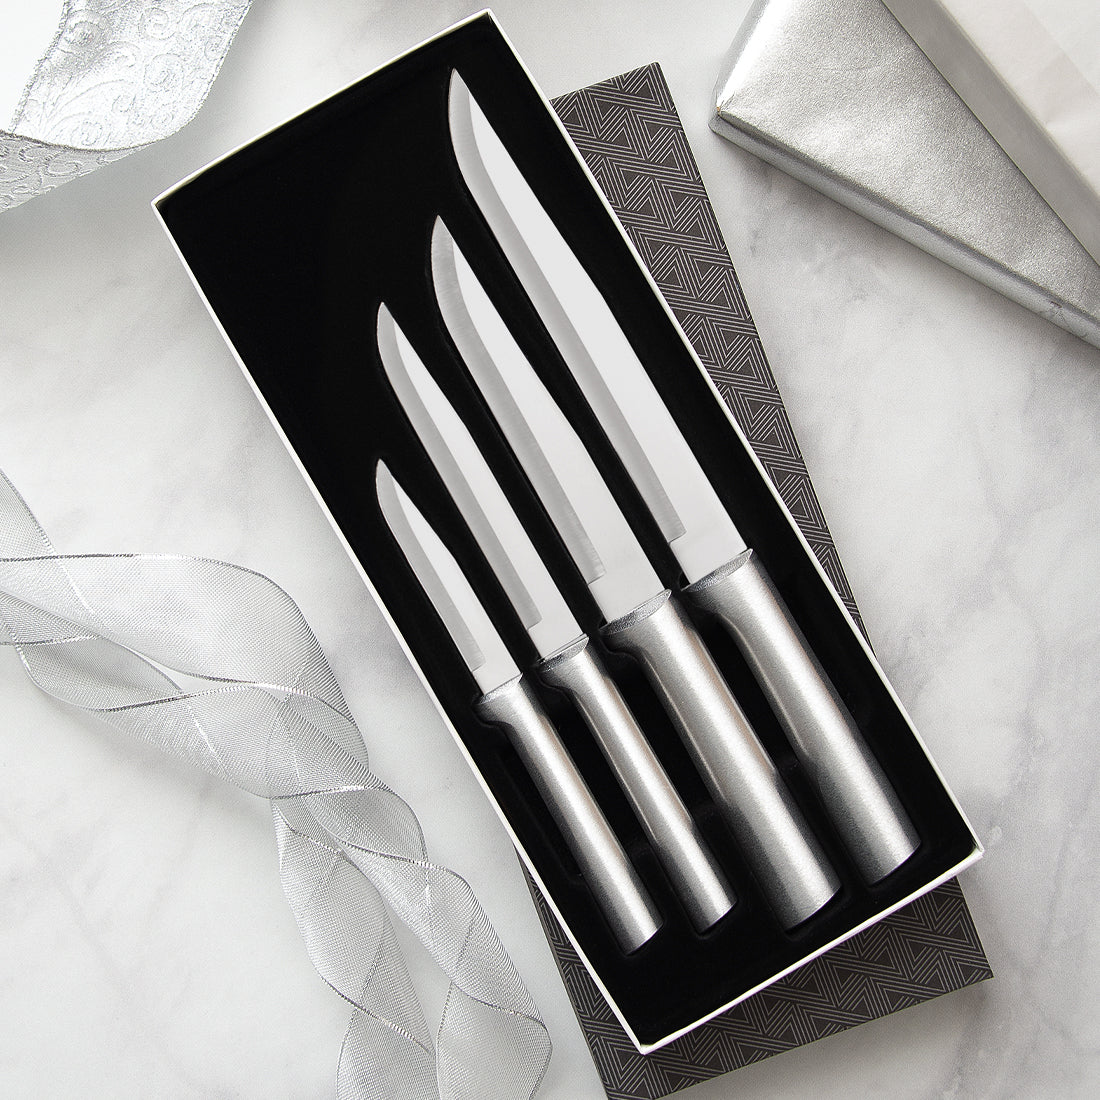 Rada Cutlery - Our outdoor lovers have their favorites too. The